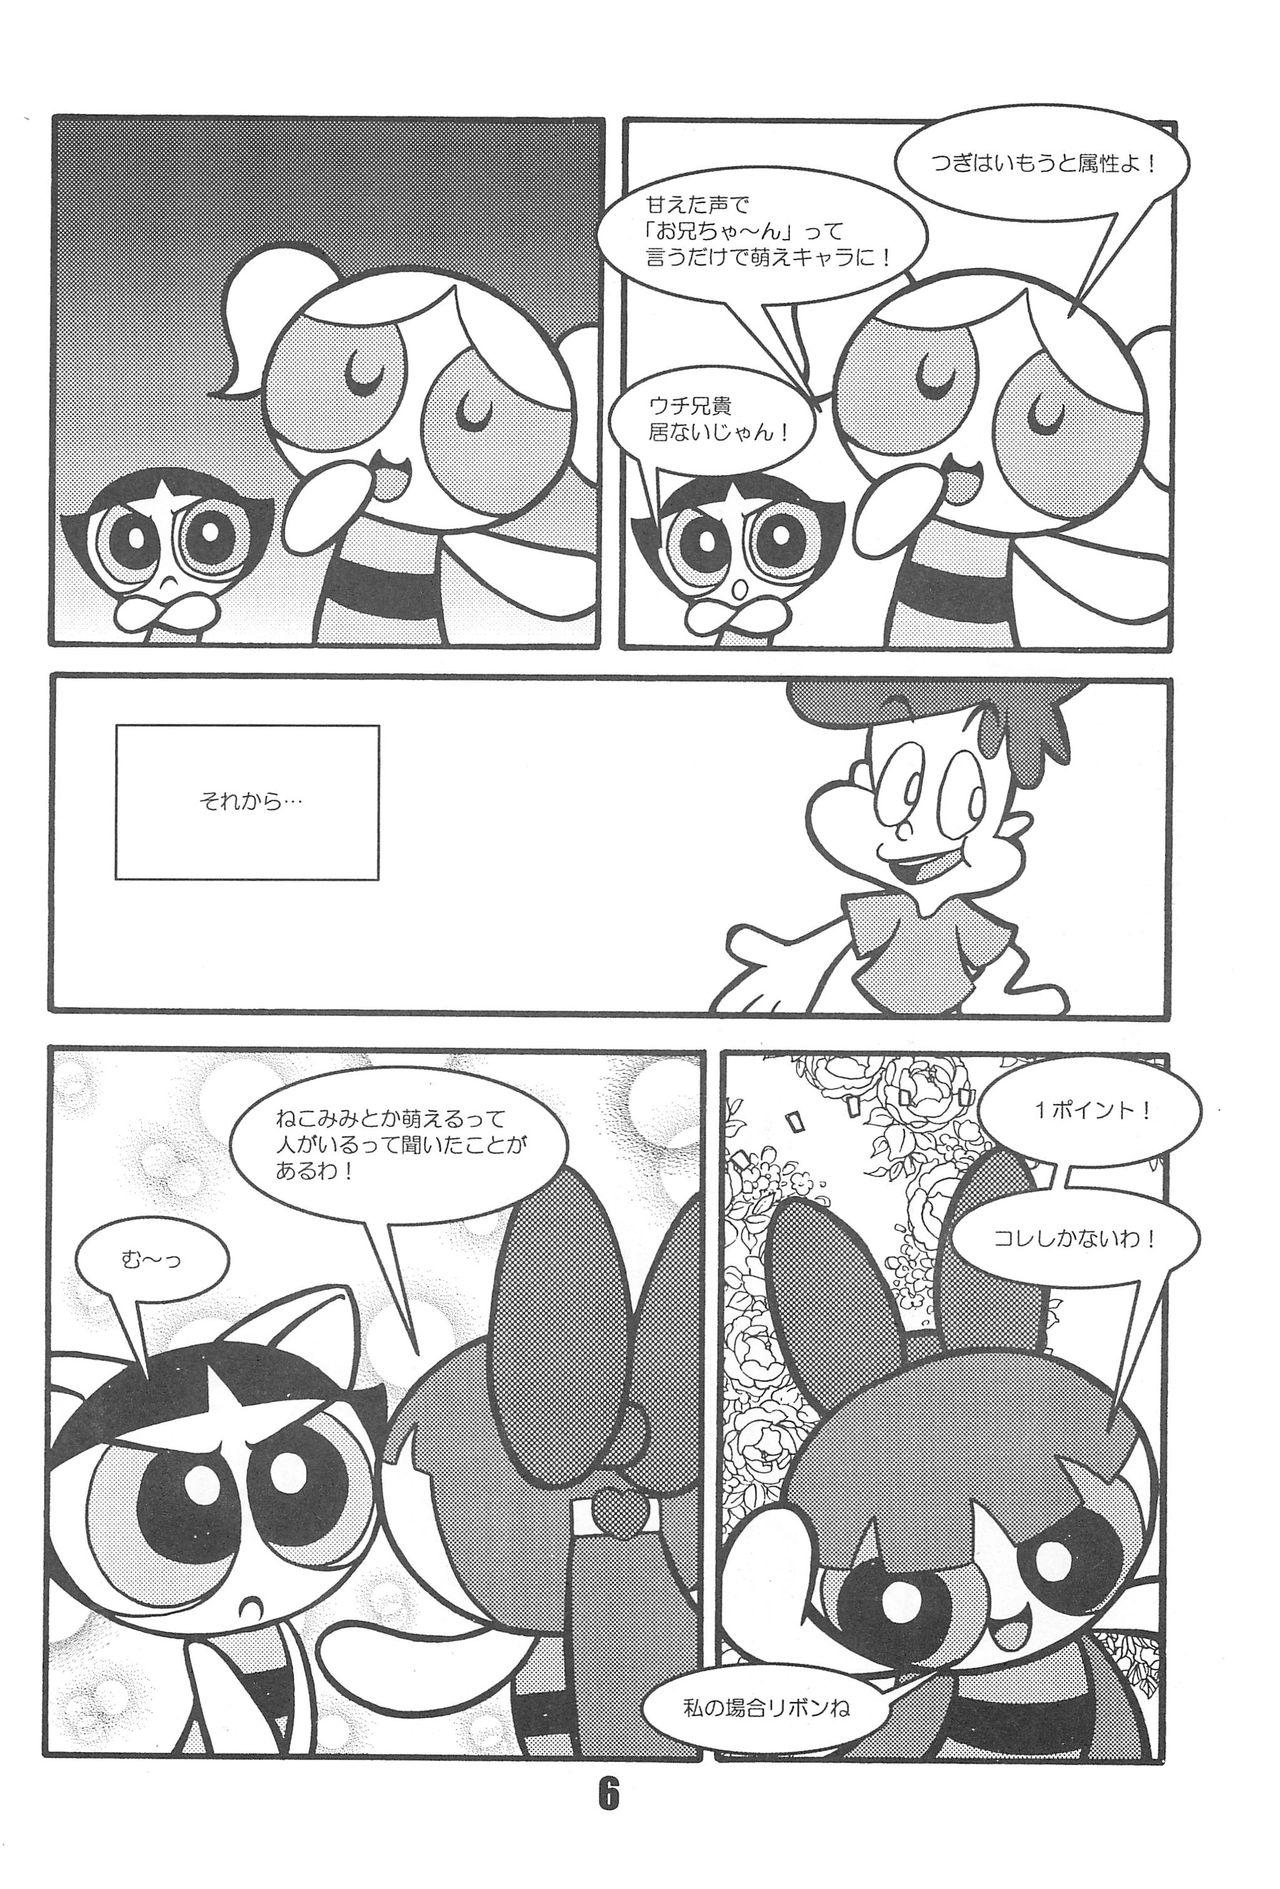 Toy Show Goes On! Funhouse 22th - The powerpuff girls Fishnets - Page 6